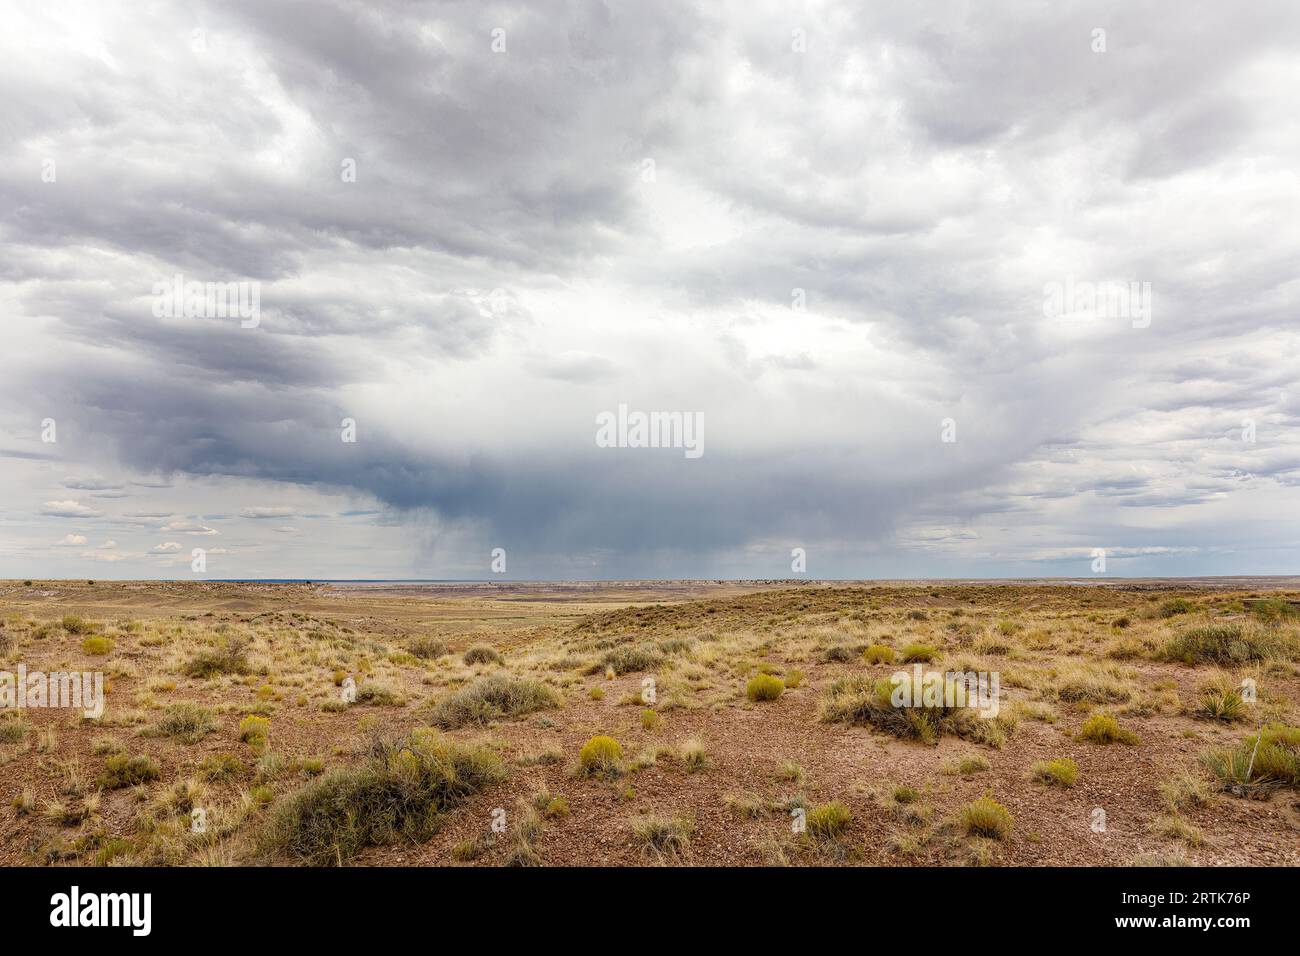 High desert with distant storm clouds, central Arizona near Holbrook, USA Stock Photo